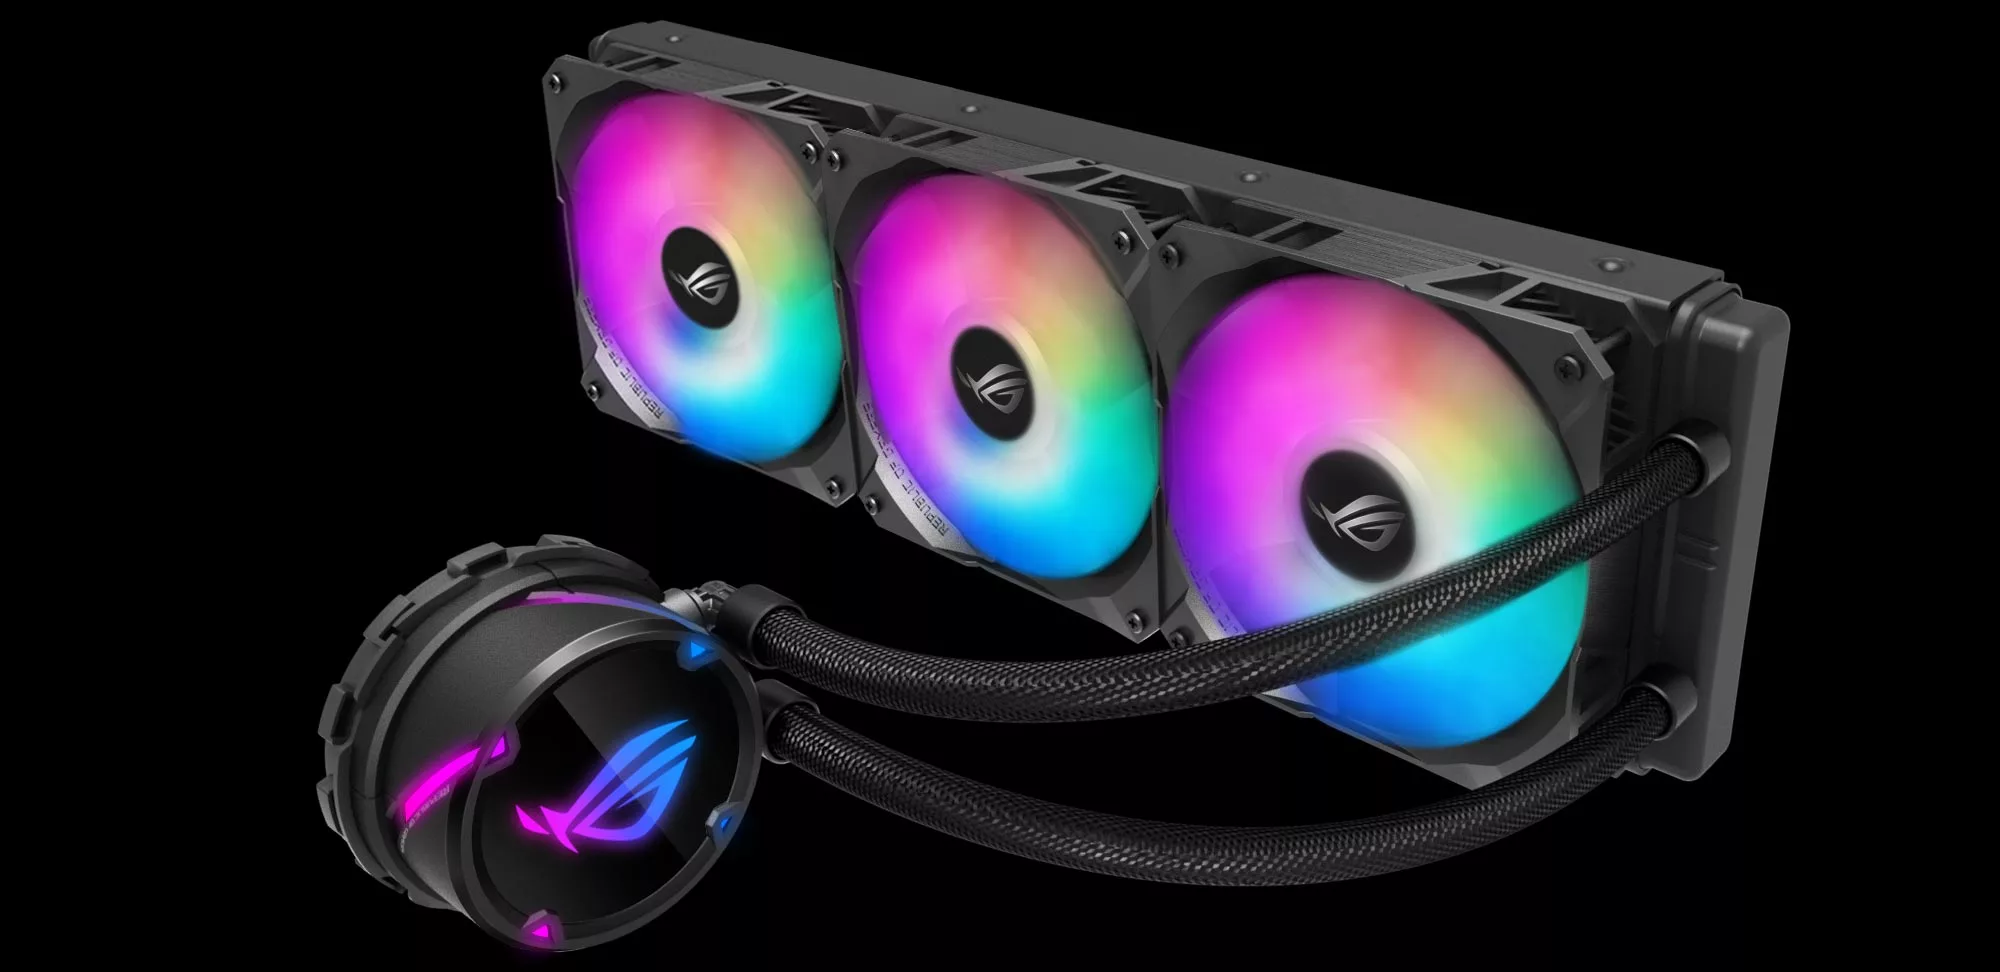 Choosing the right AIO cooler for your build: your guide to ROG's  all-in-one cooler family | ROG - Republic of Gamers Global